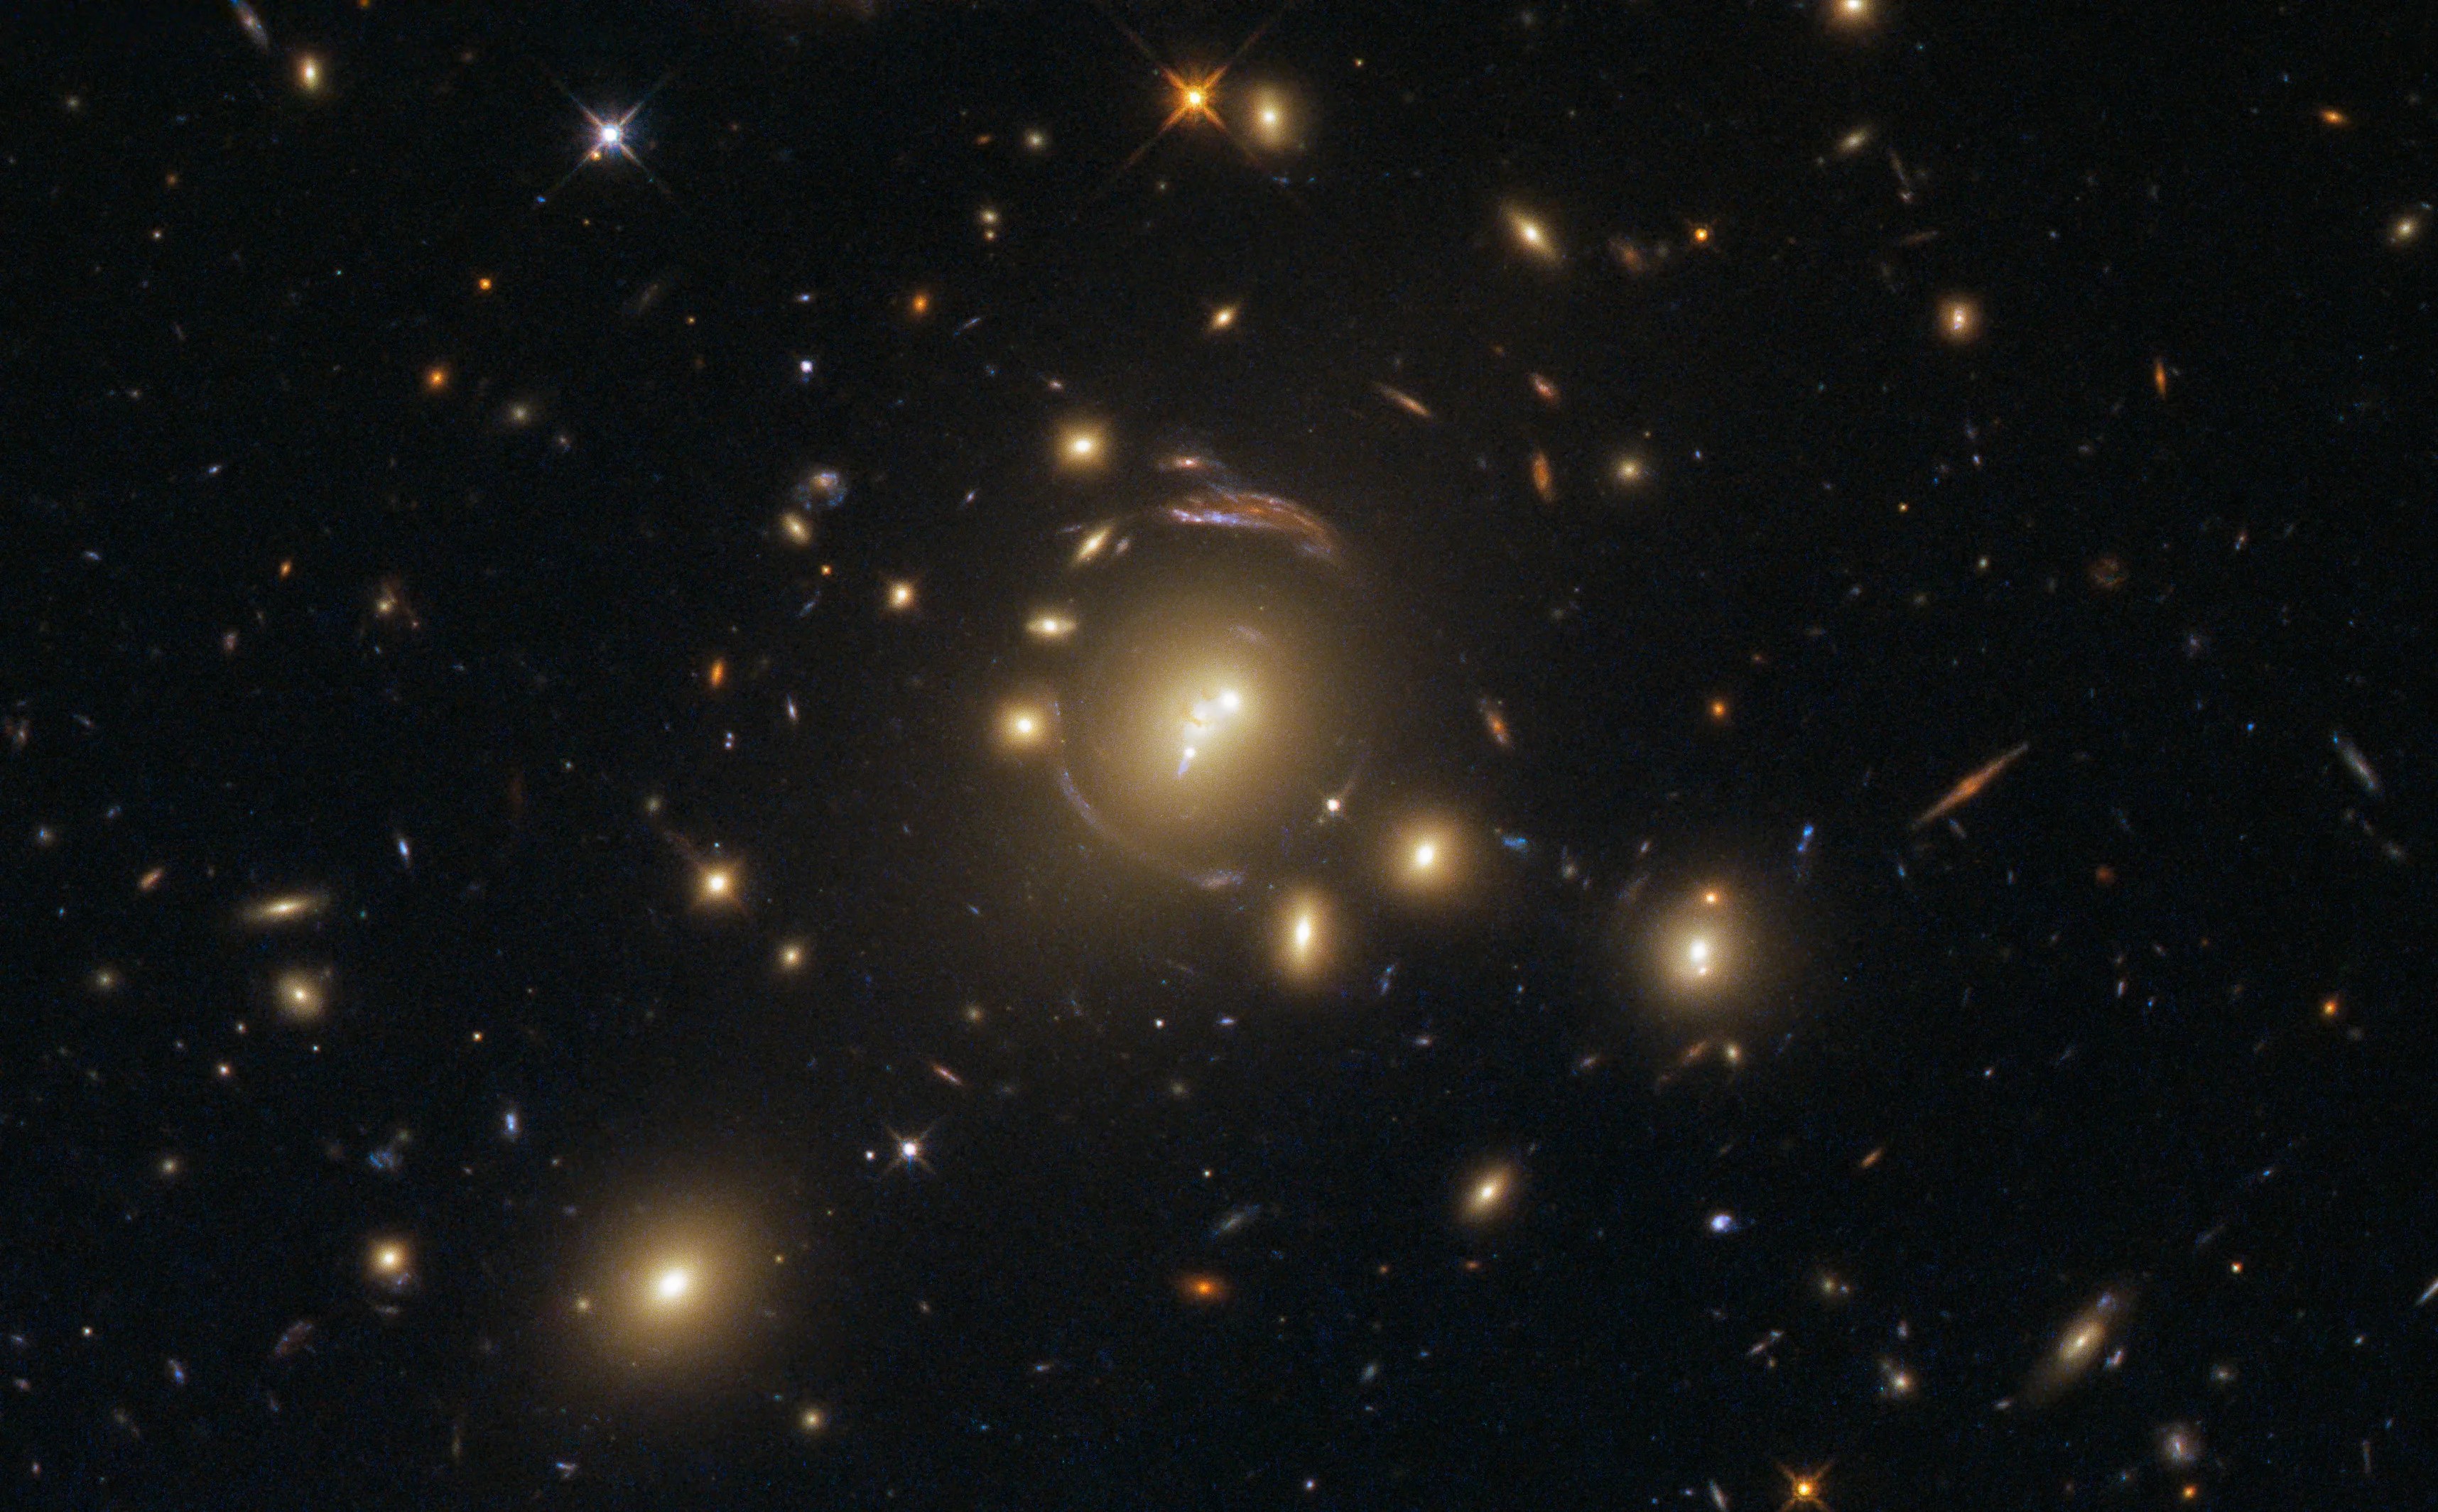 Fuzzy amber blobs create ring-shaped distorted galaxies